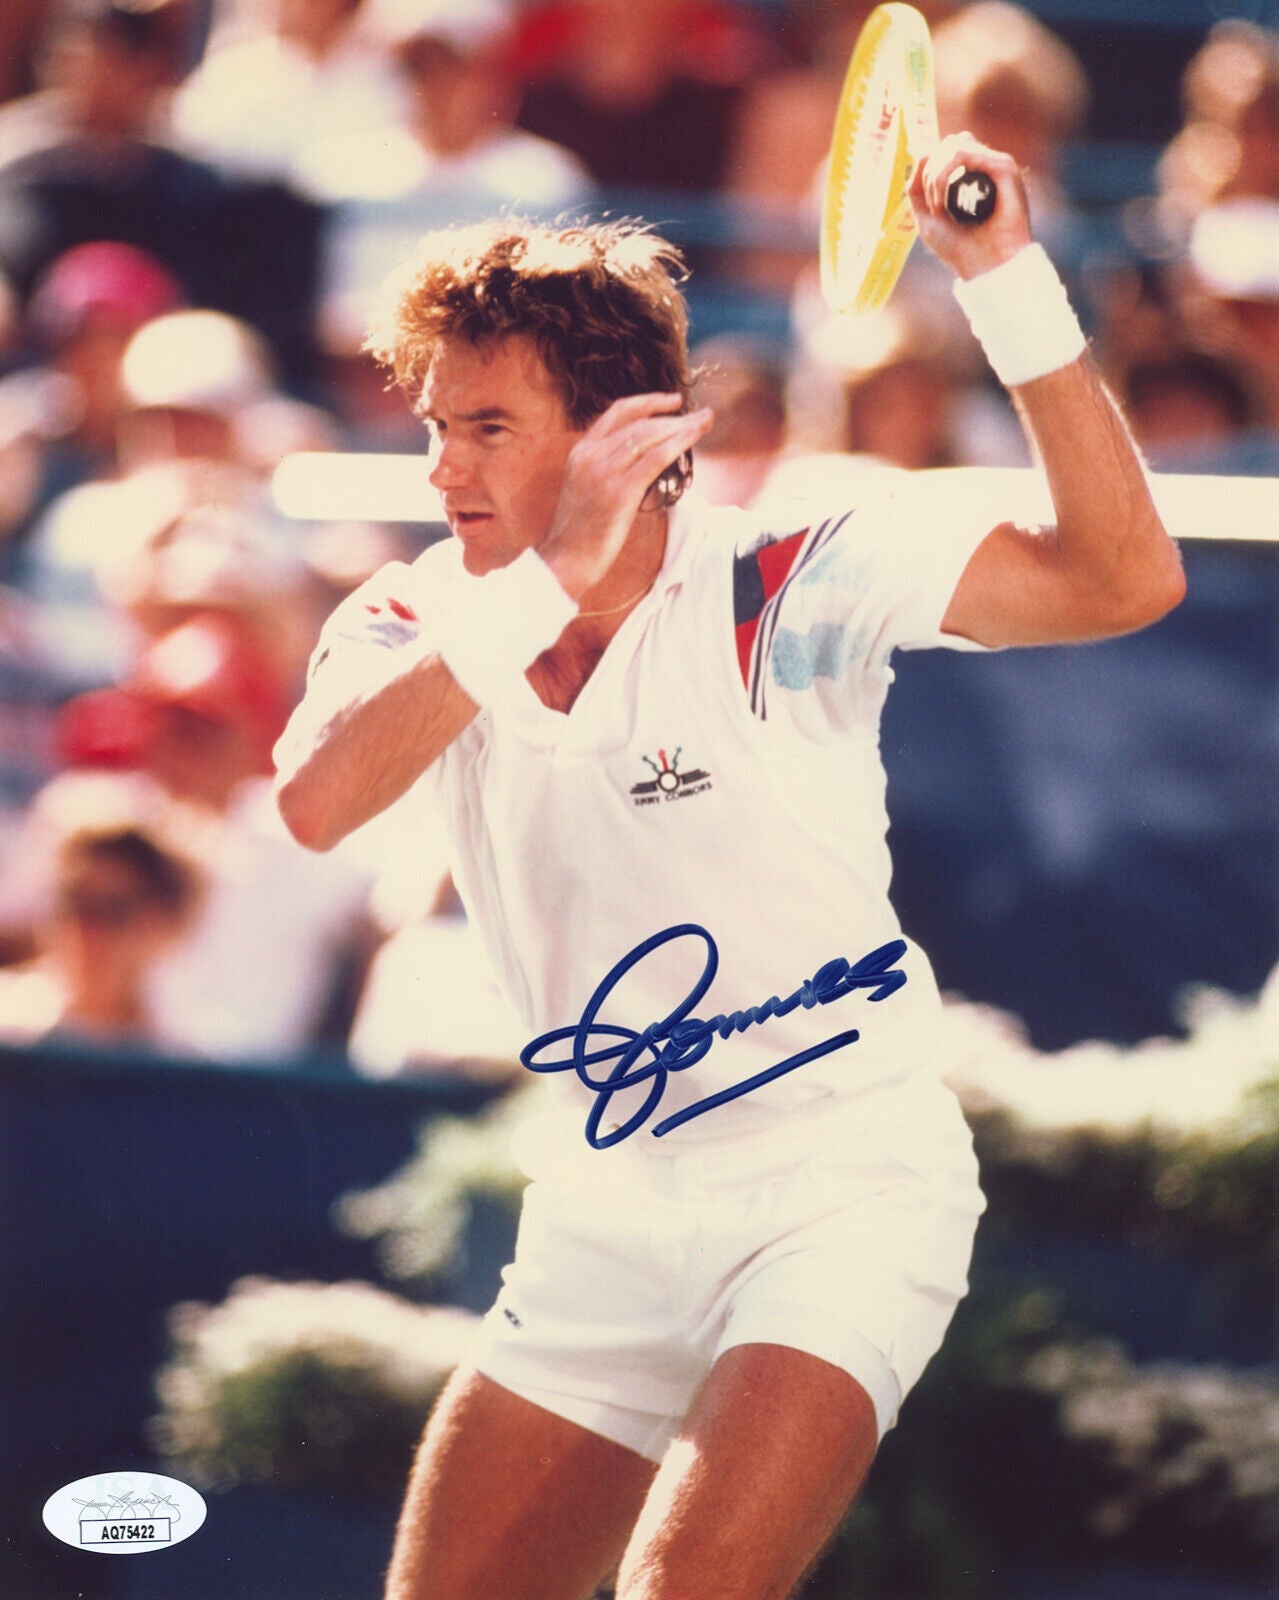 Jimmy Connors Tennis Signed 8x10 Photo. JSA